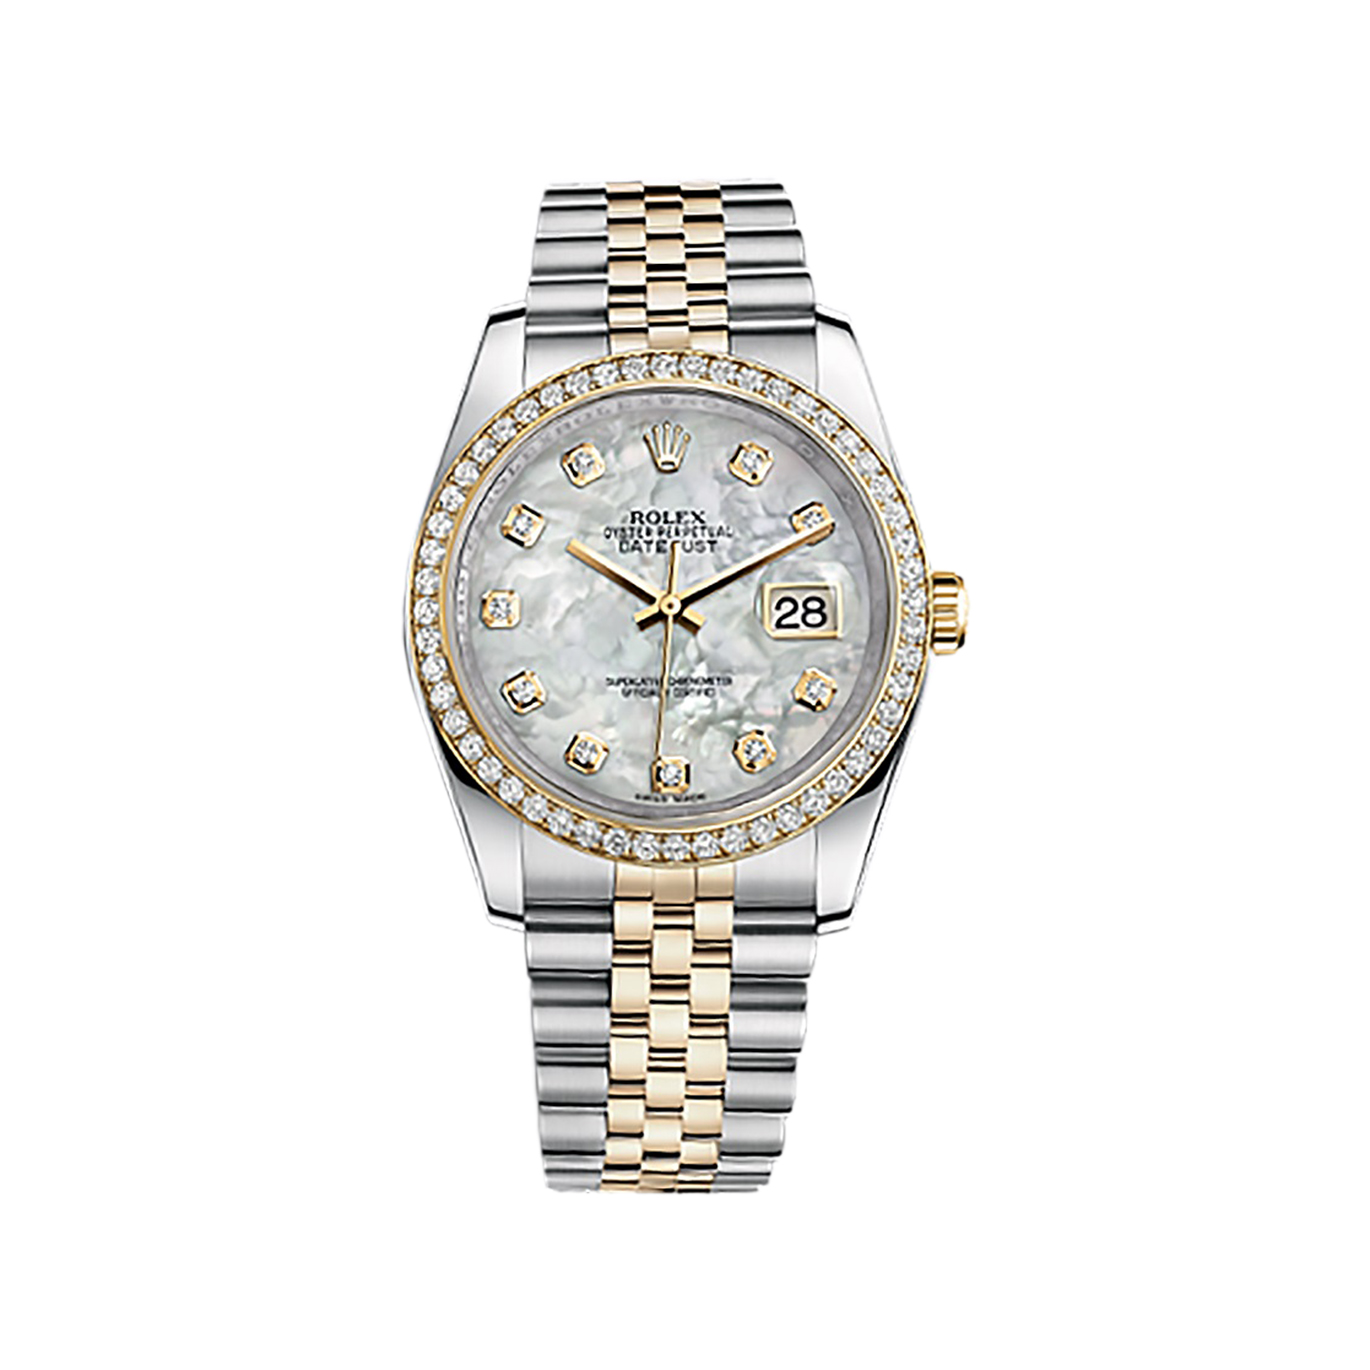 Datejust 36 116243 Gold & Stainless Steel Watch (White Mother-of-Pearl Set with Diamonds) - Click Image to Close